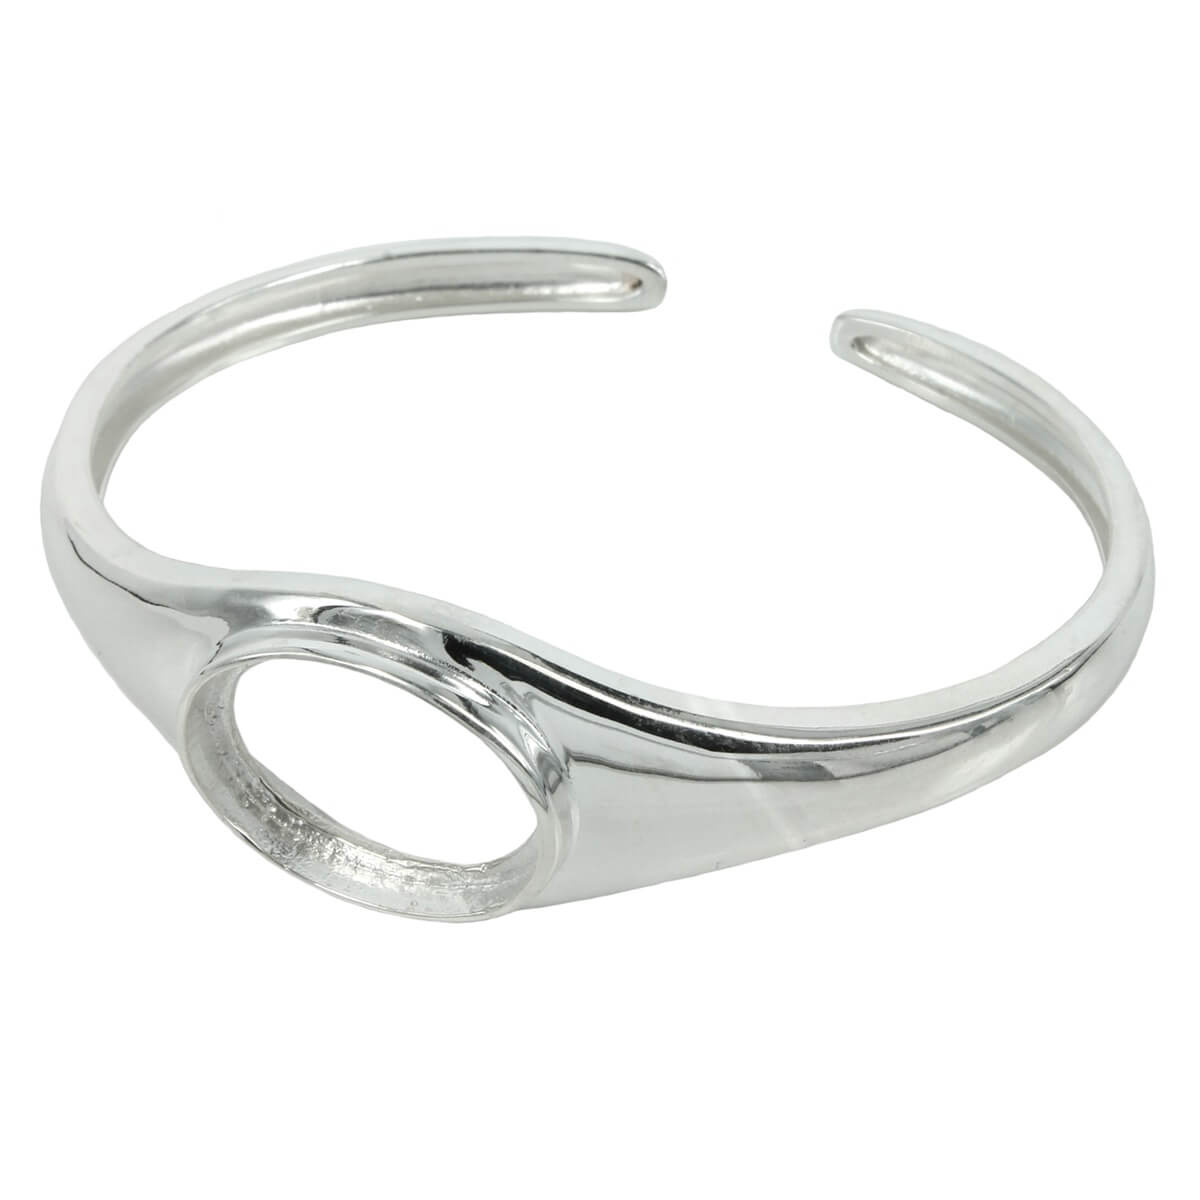 Solid Cuff Bracelet with 15x20mm Oval Bezel Mounting in Sterling Silver 